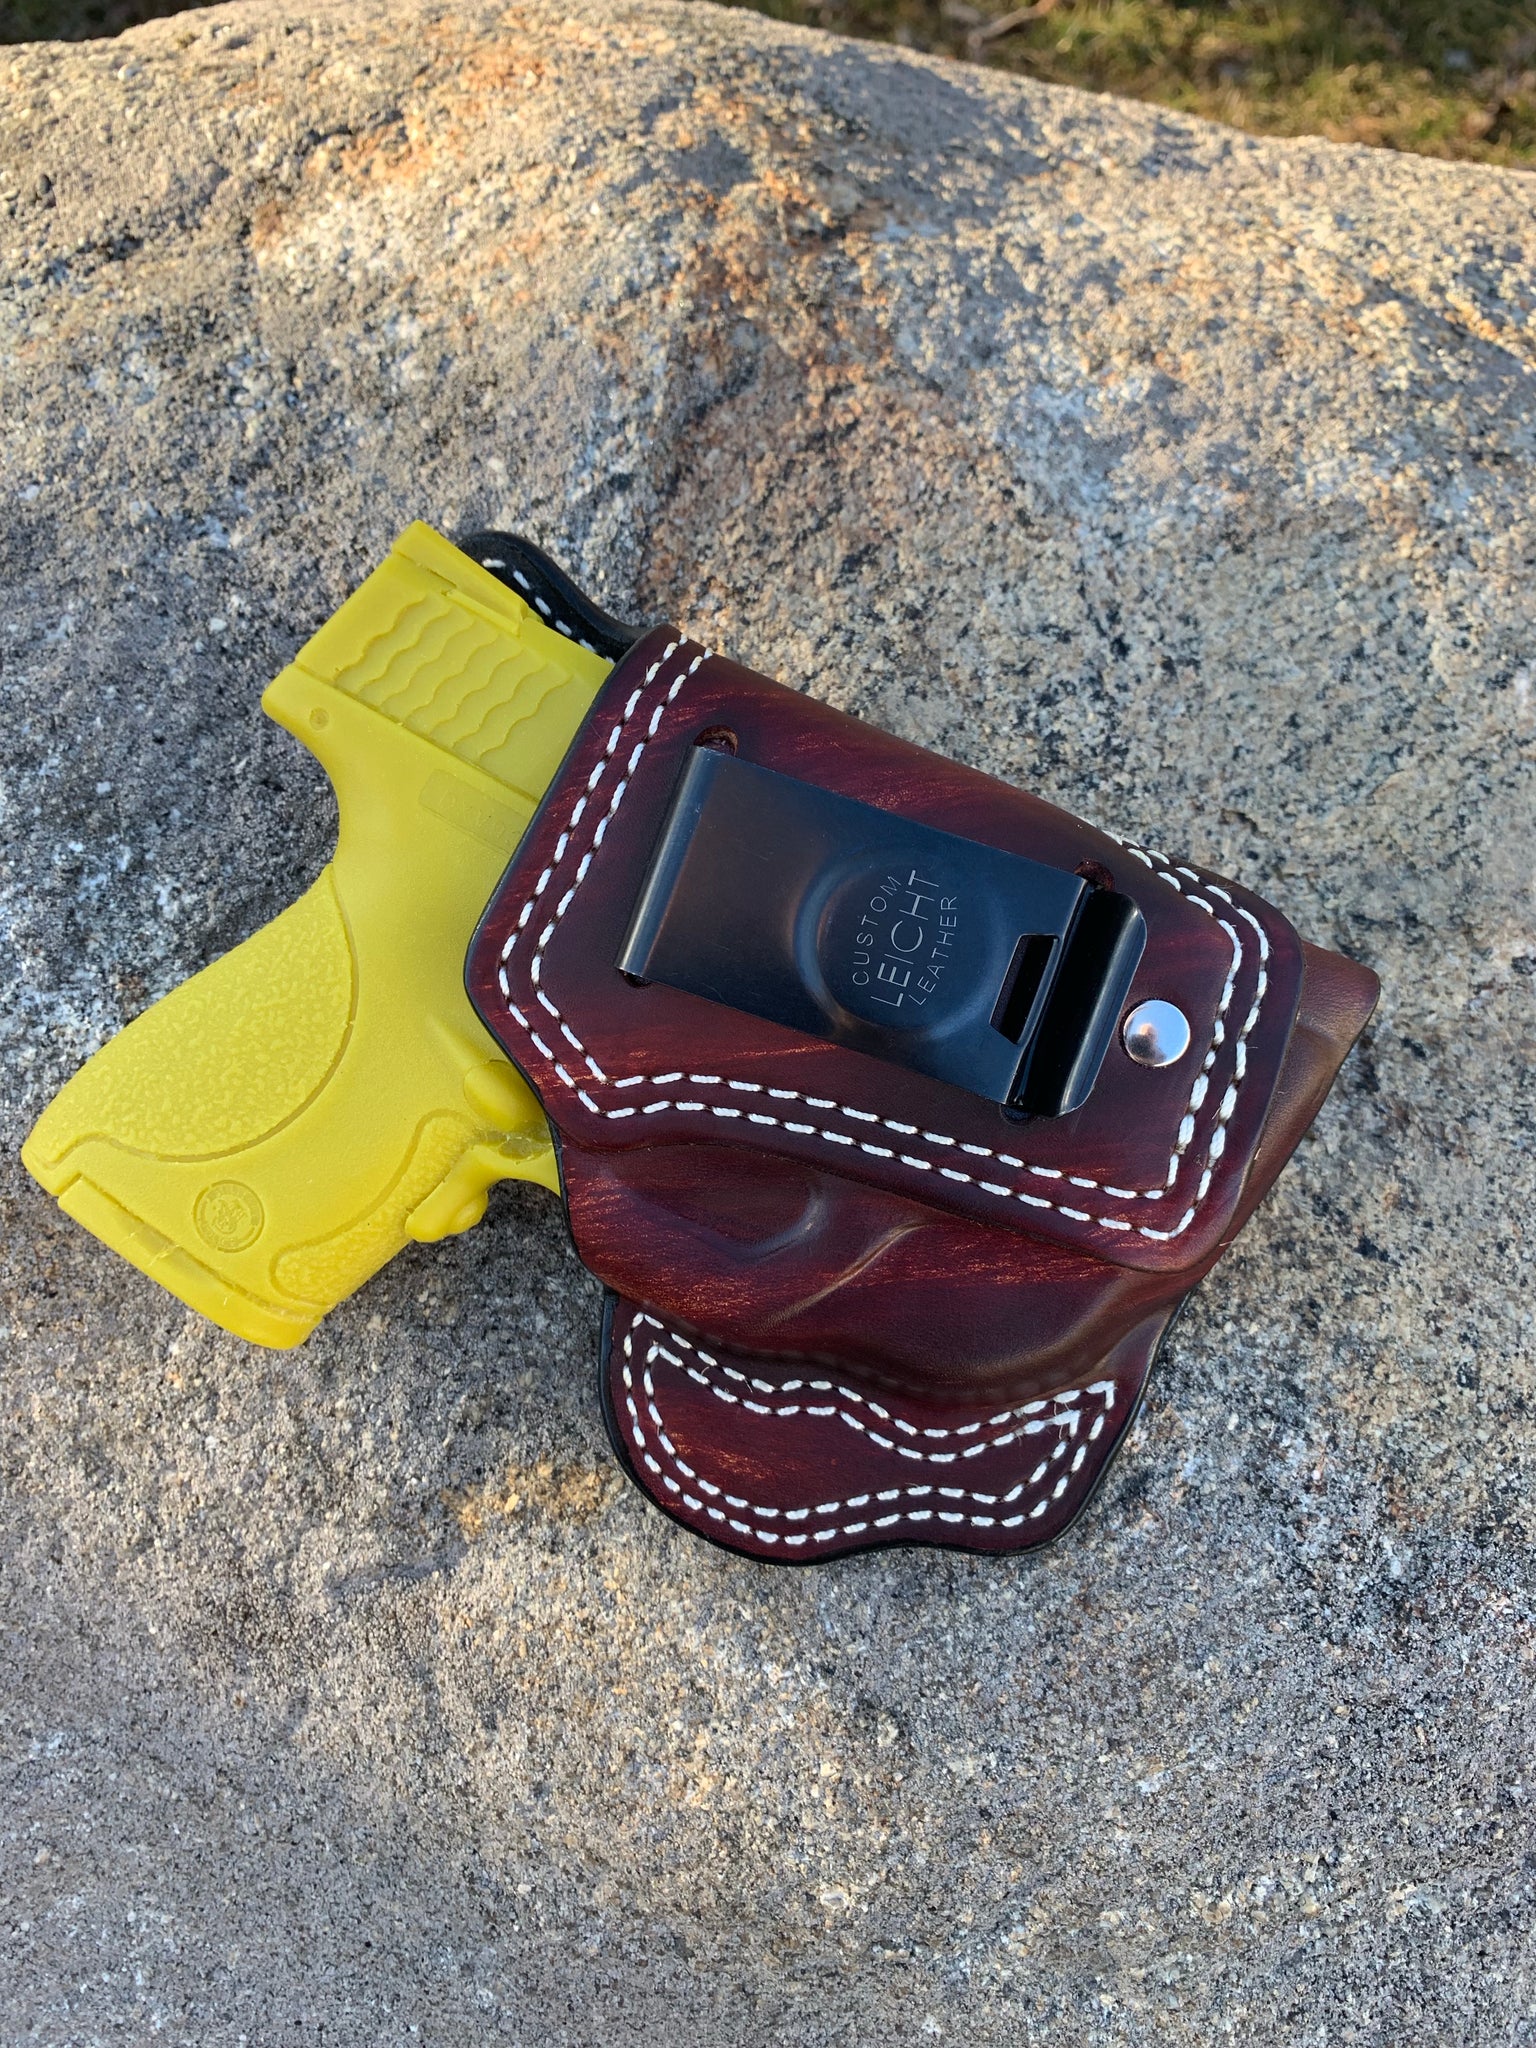 M&P Shield IWB Holster with Crimson Trace